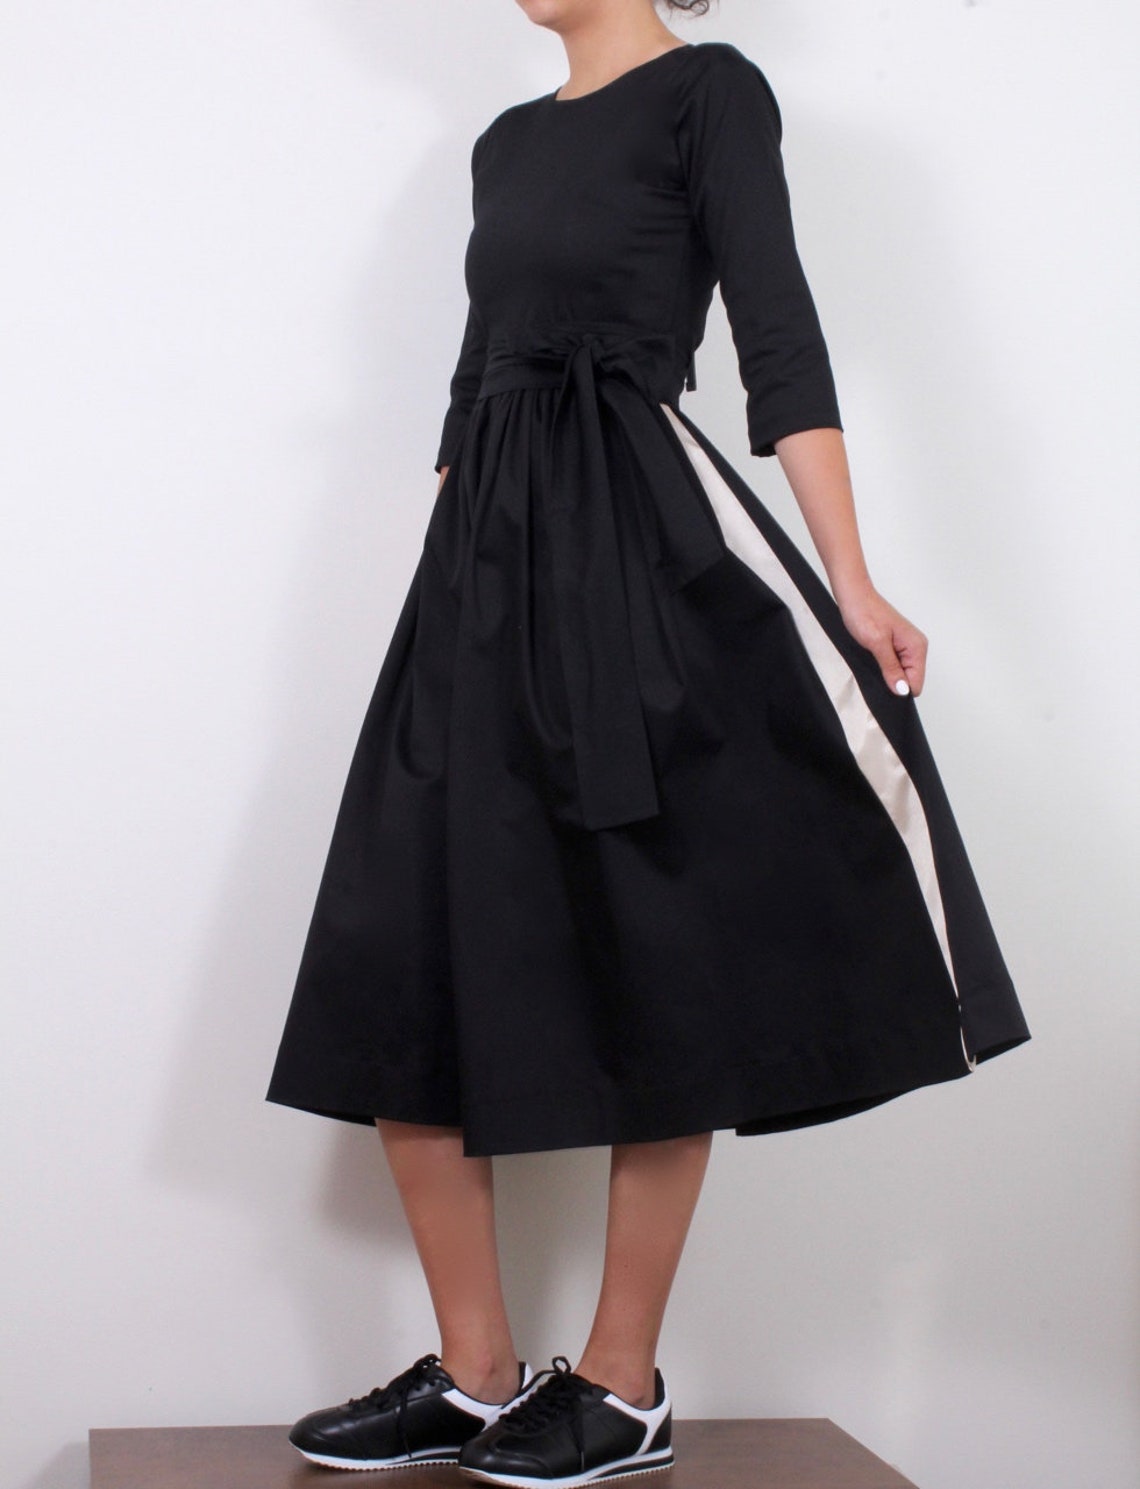 Dress in Black With Contrasting Trims in Vanilla Color - Etsy